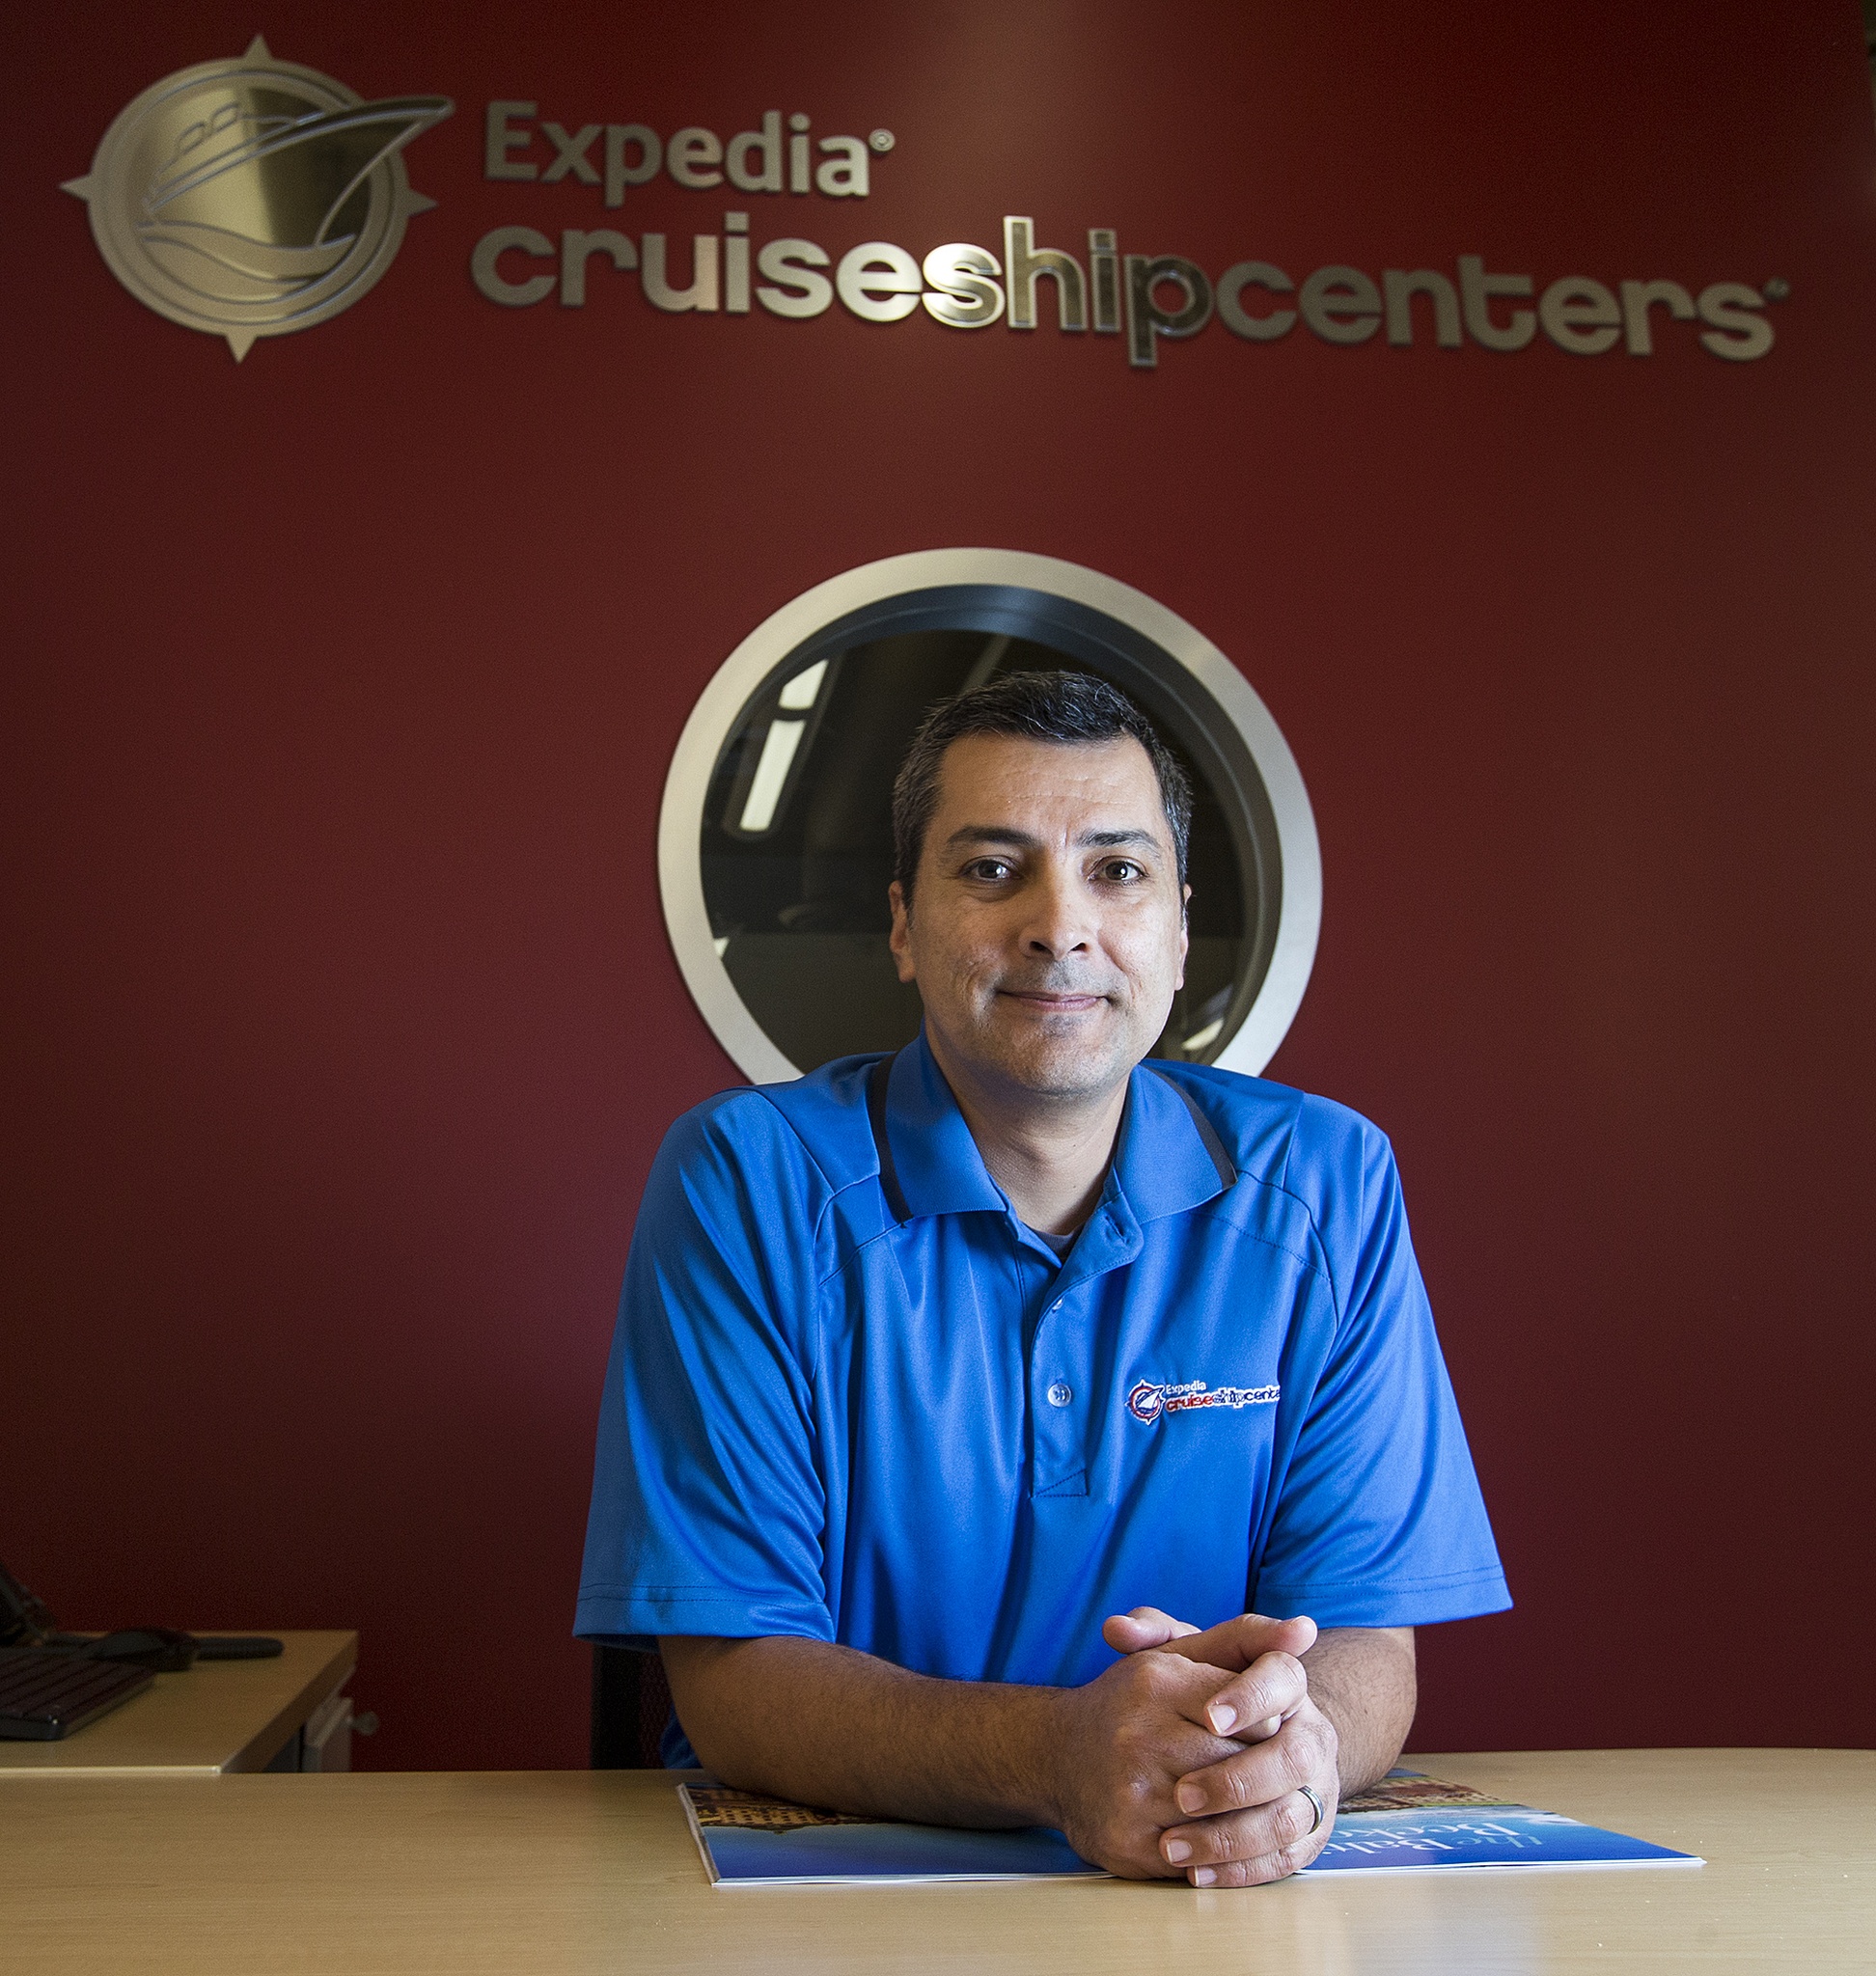 Ricardo Pruneda opened an Expedia CruiseShipCenters franchise in Mill Creek Town Center in August. Expedia currently operates 225 locations in the U.S. and Canada. (Ian Terry / The Herald)